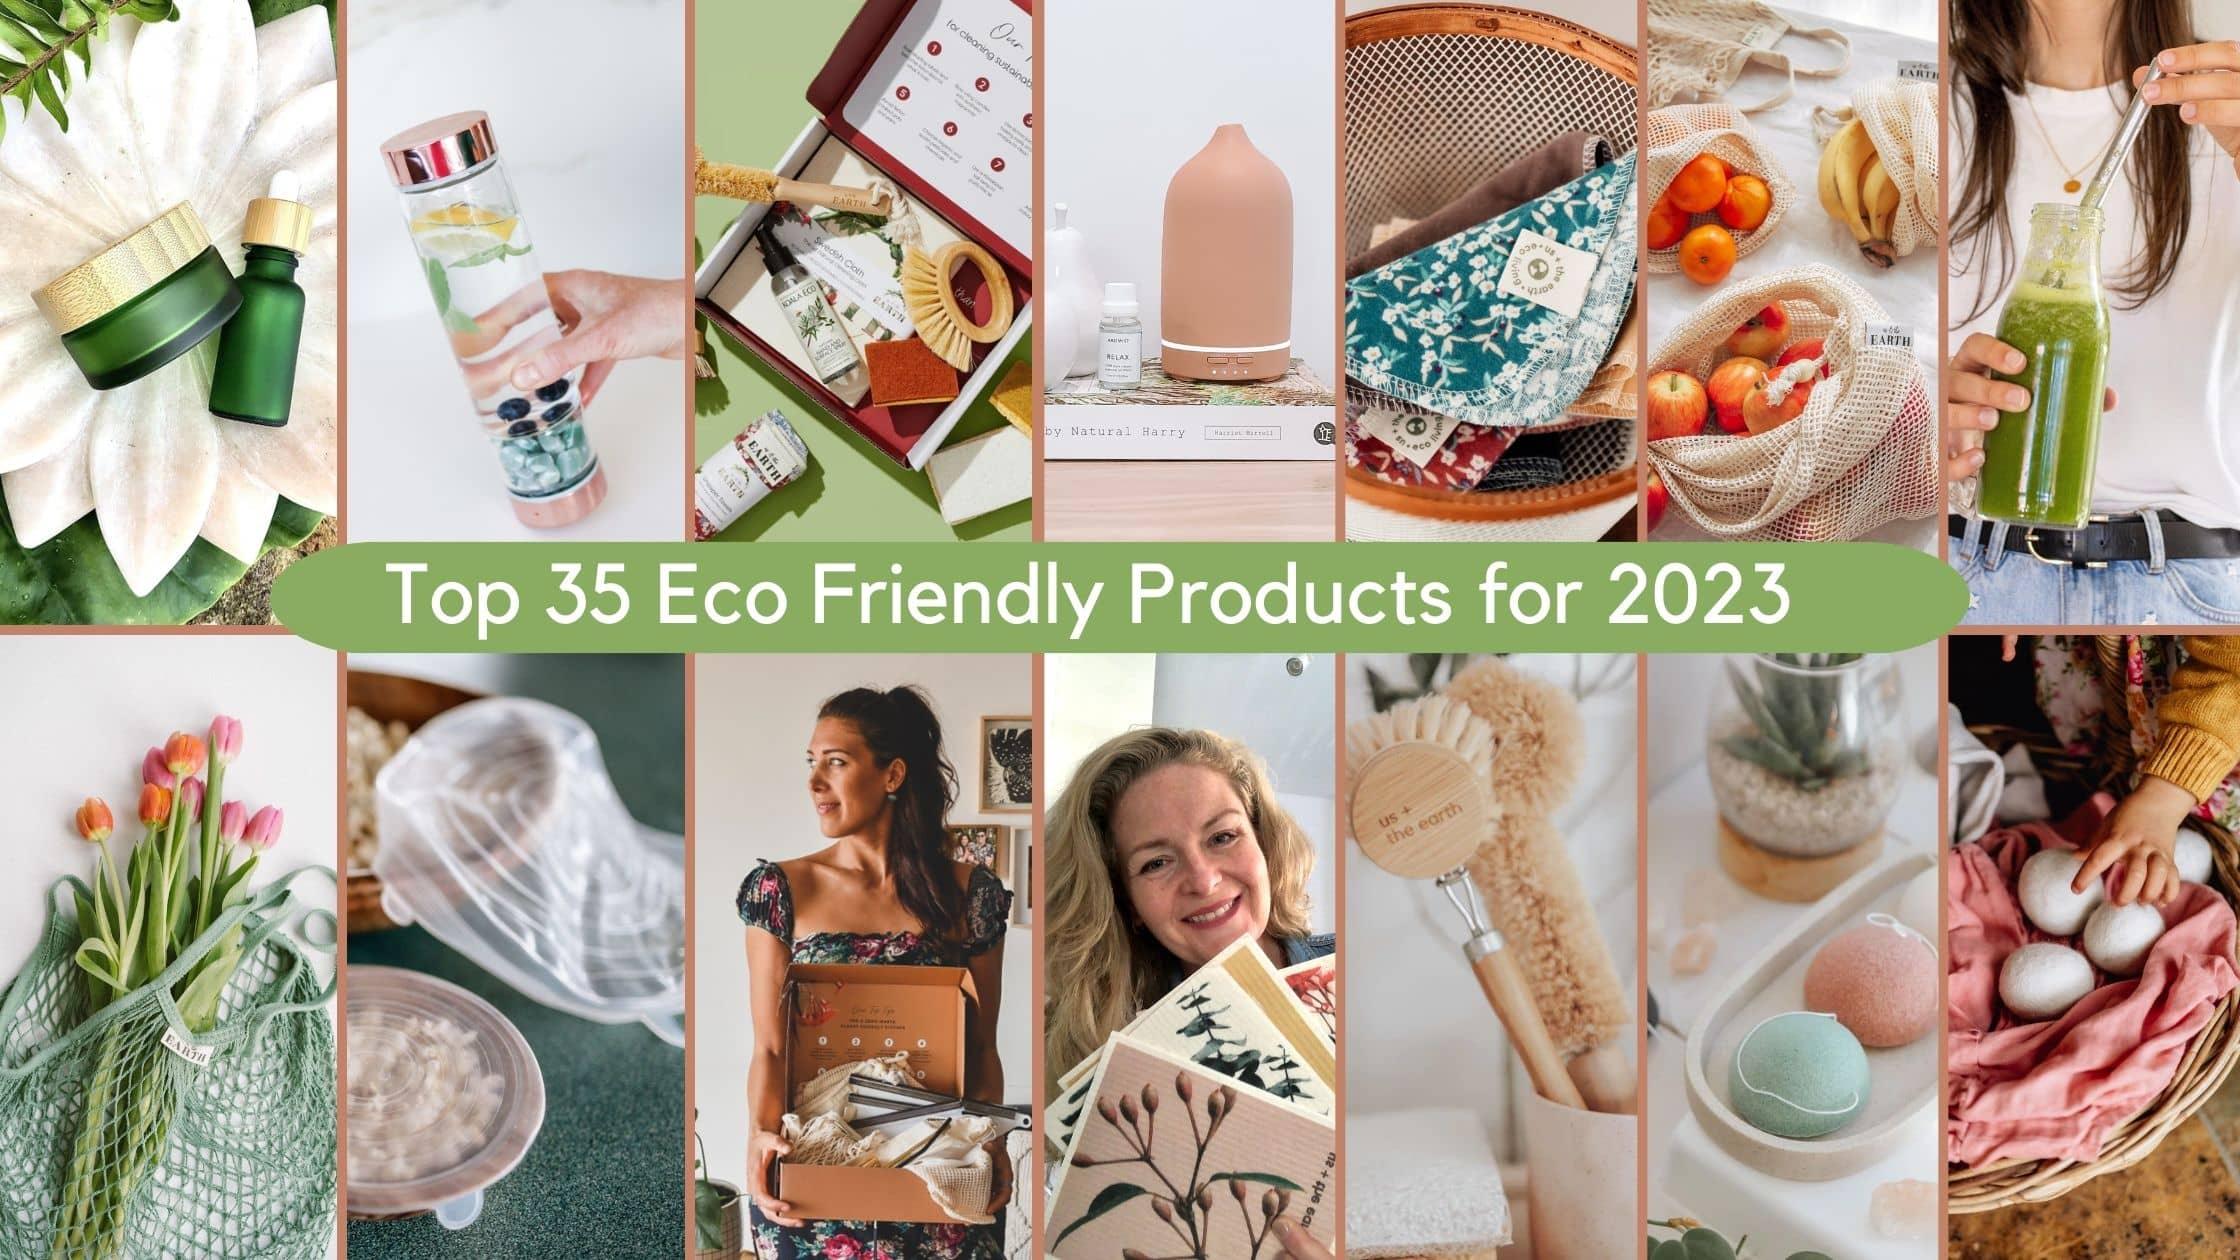 The top 35 Eco friendly products for 2023